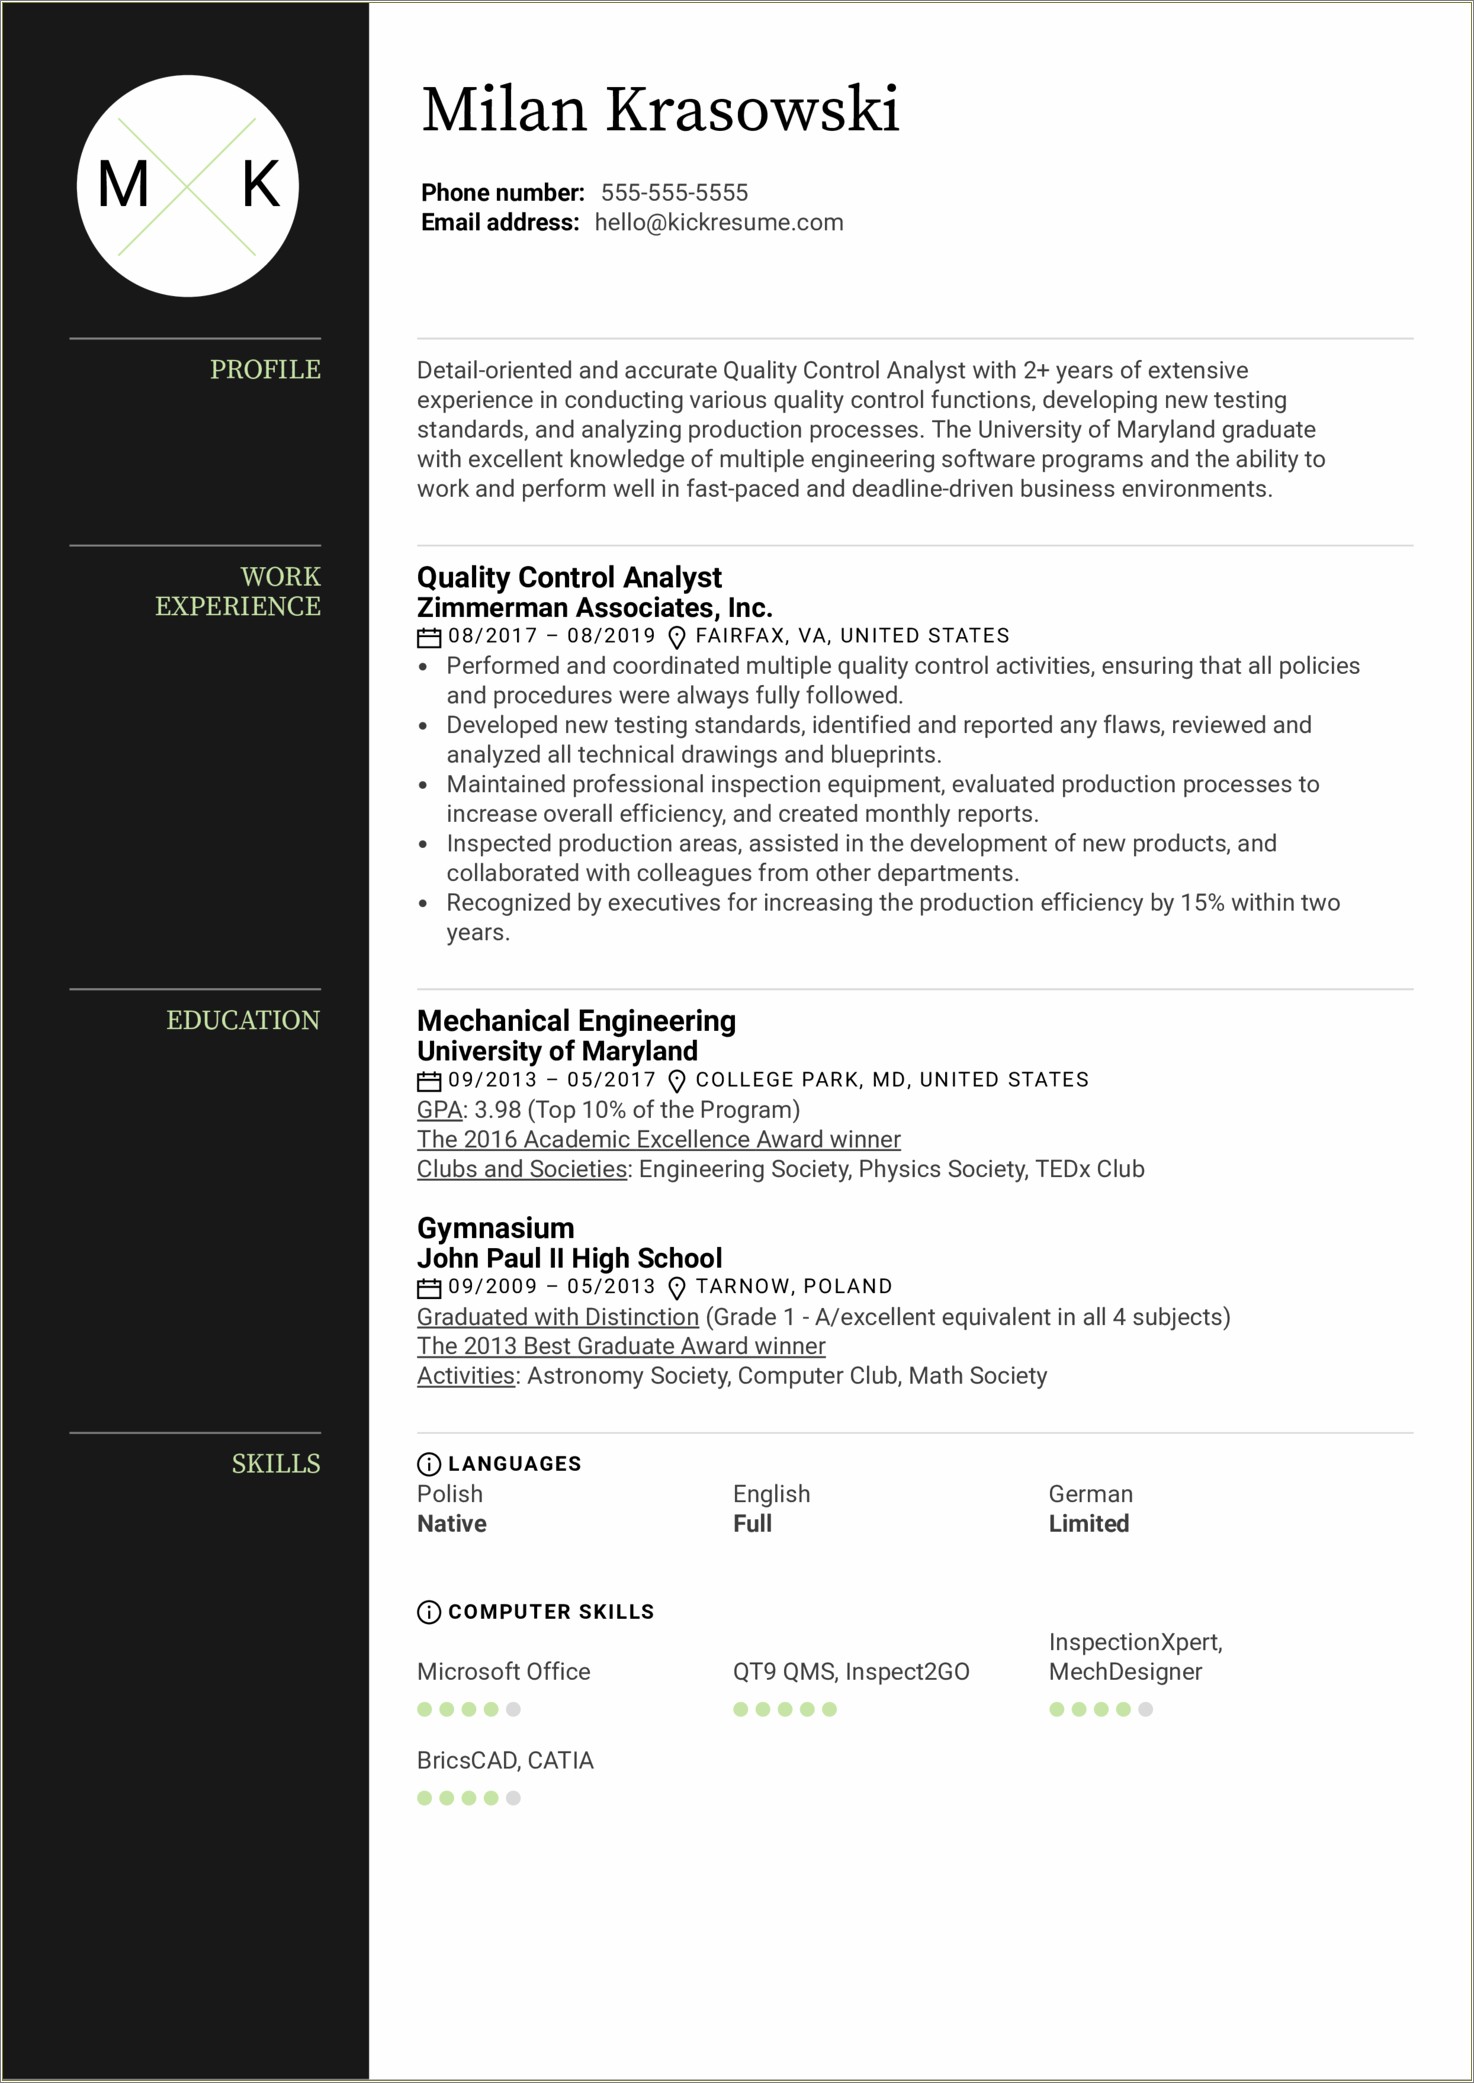 Call Center Quality Analyst Resume Example